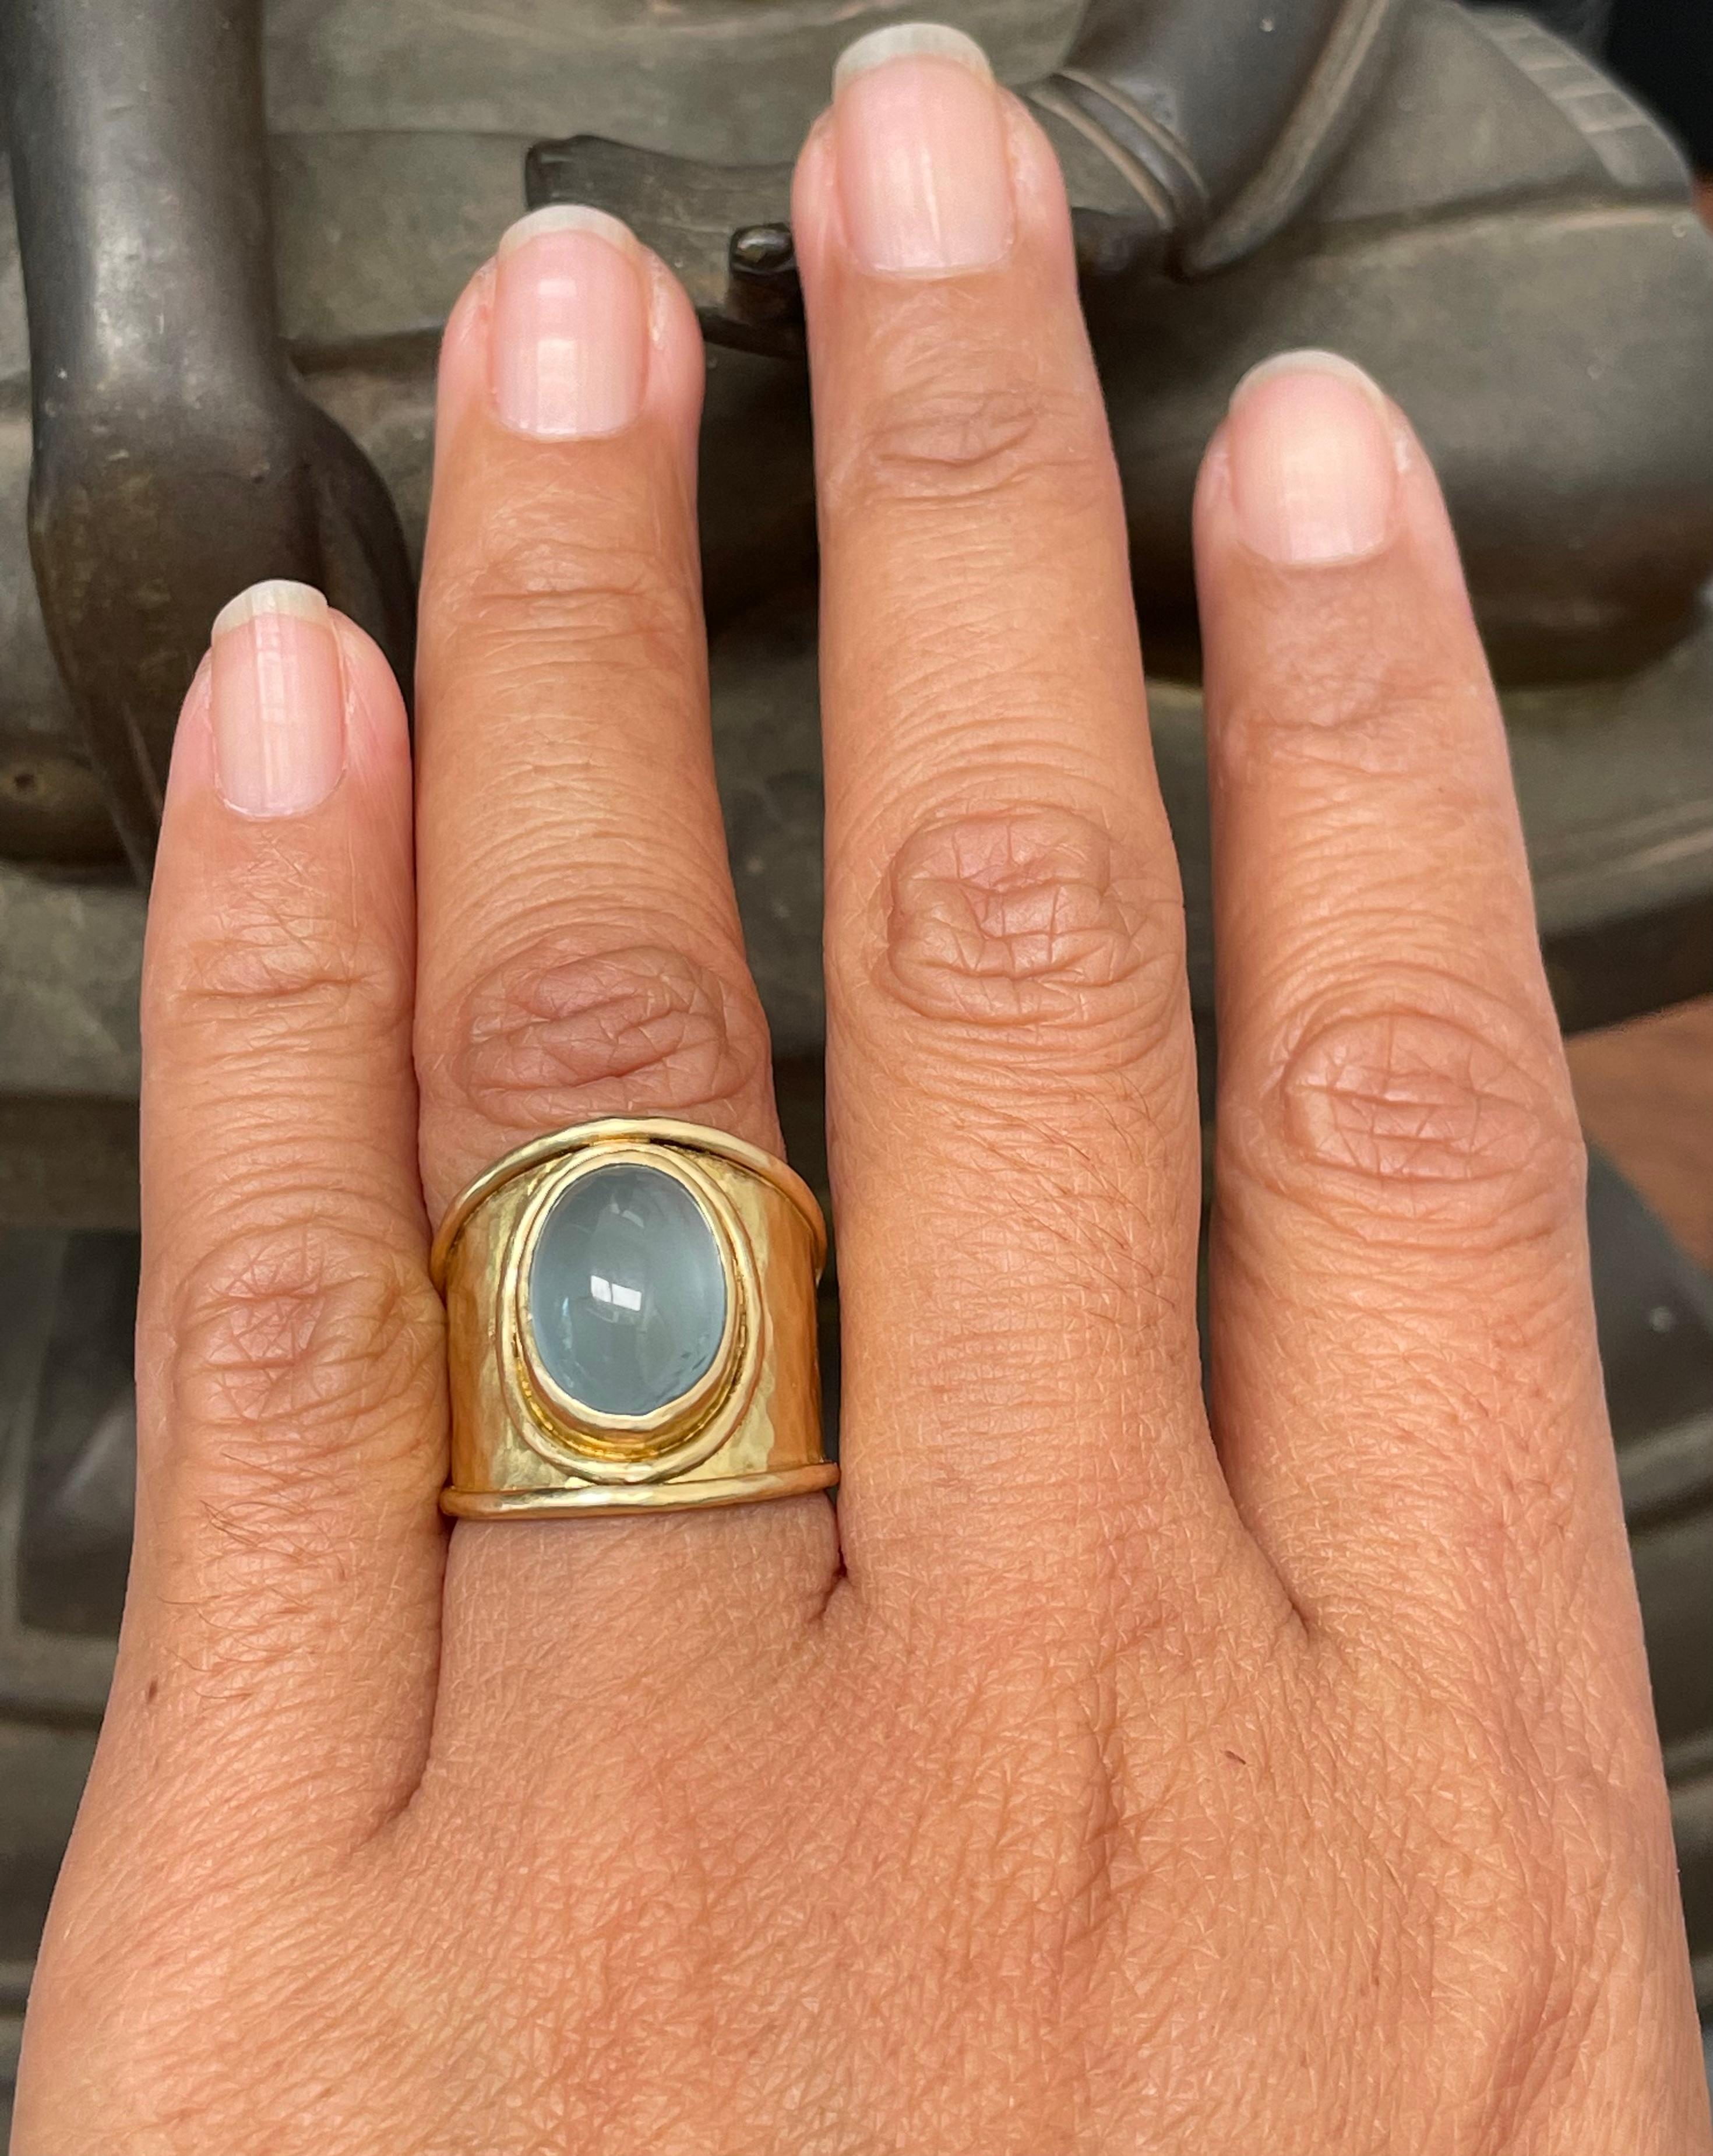 A nice sea green aquamarine 9 x 13 mm oval cabochon rests in a slightly cupped hammered 18K bezel surrounded by textured wire on a wide hammered textured 18K cigar band.  This stone has a lot of moonstone like chatoyancy.  This ring is sized 6.5.  